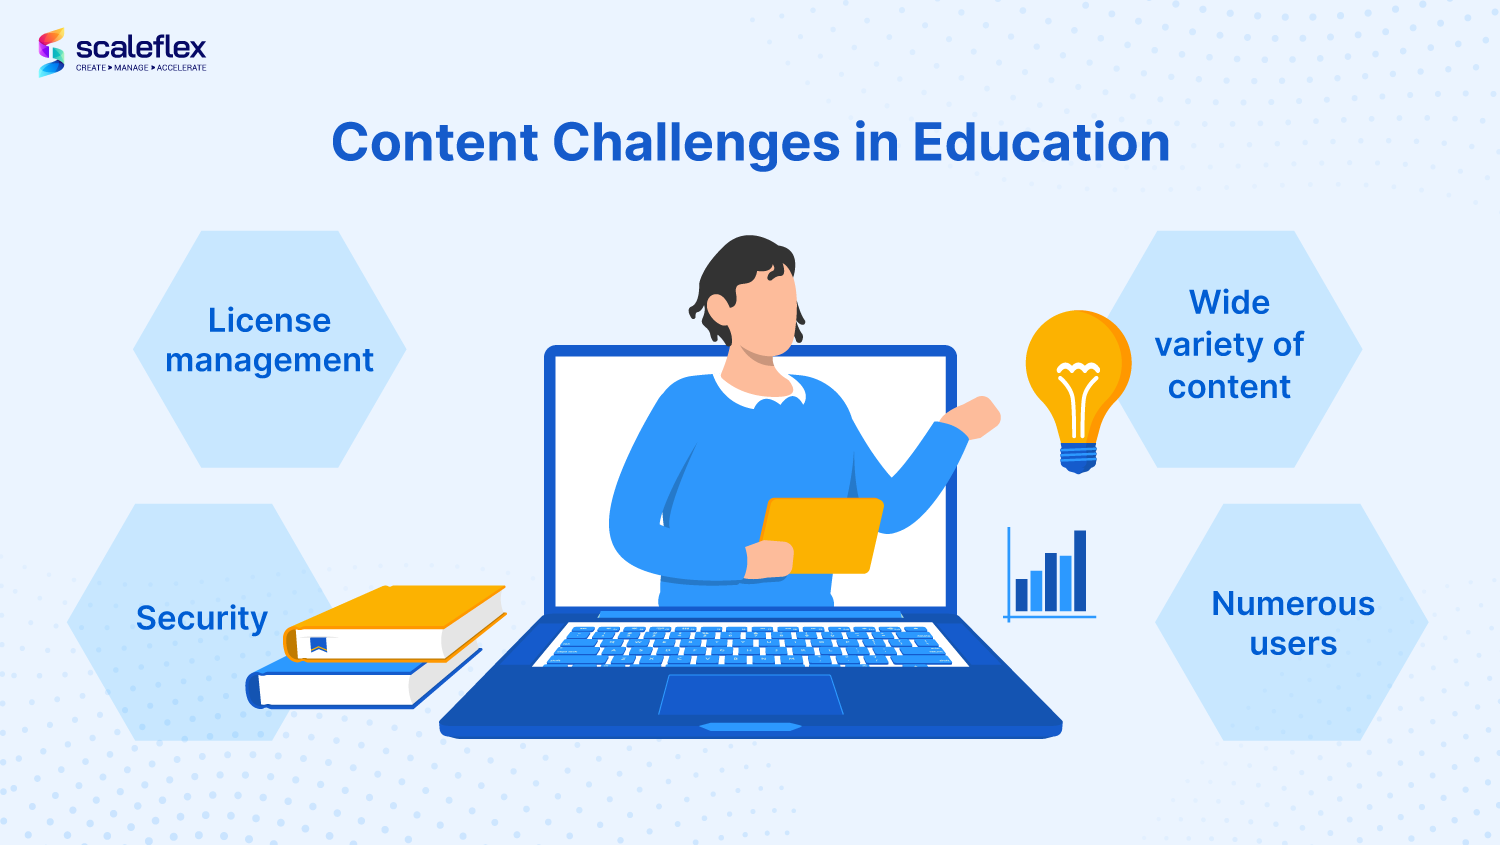  Content challenges in education